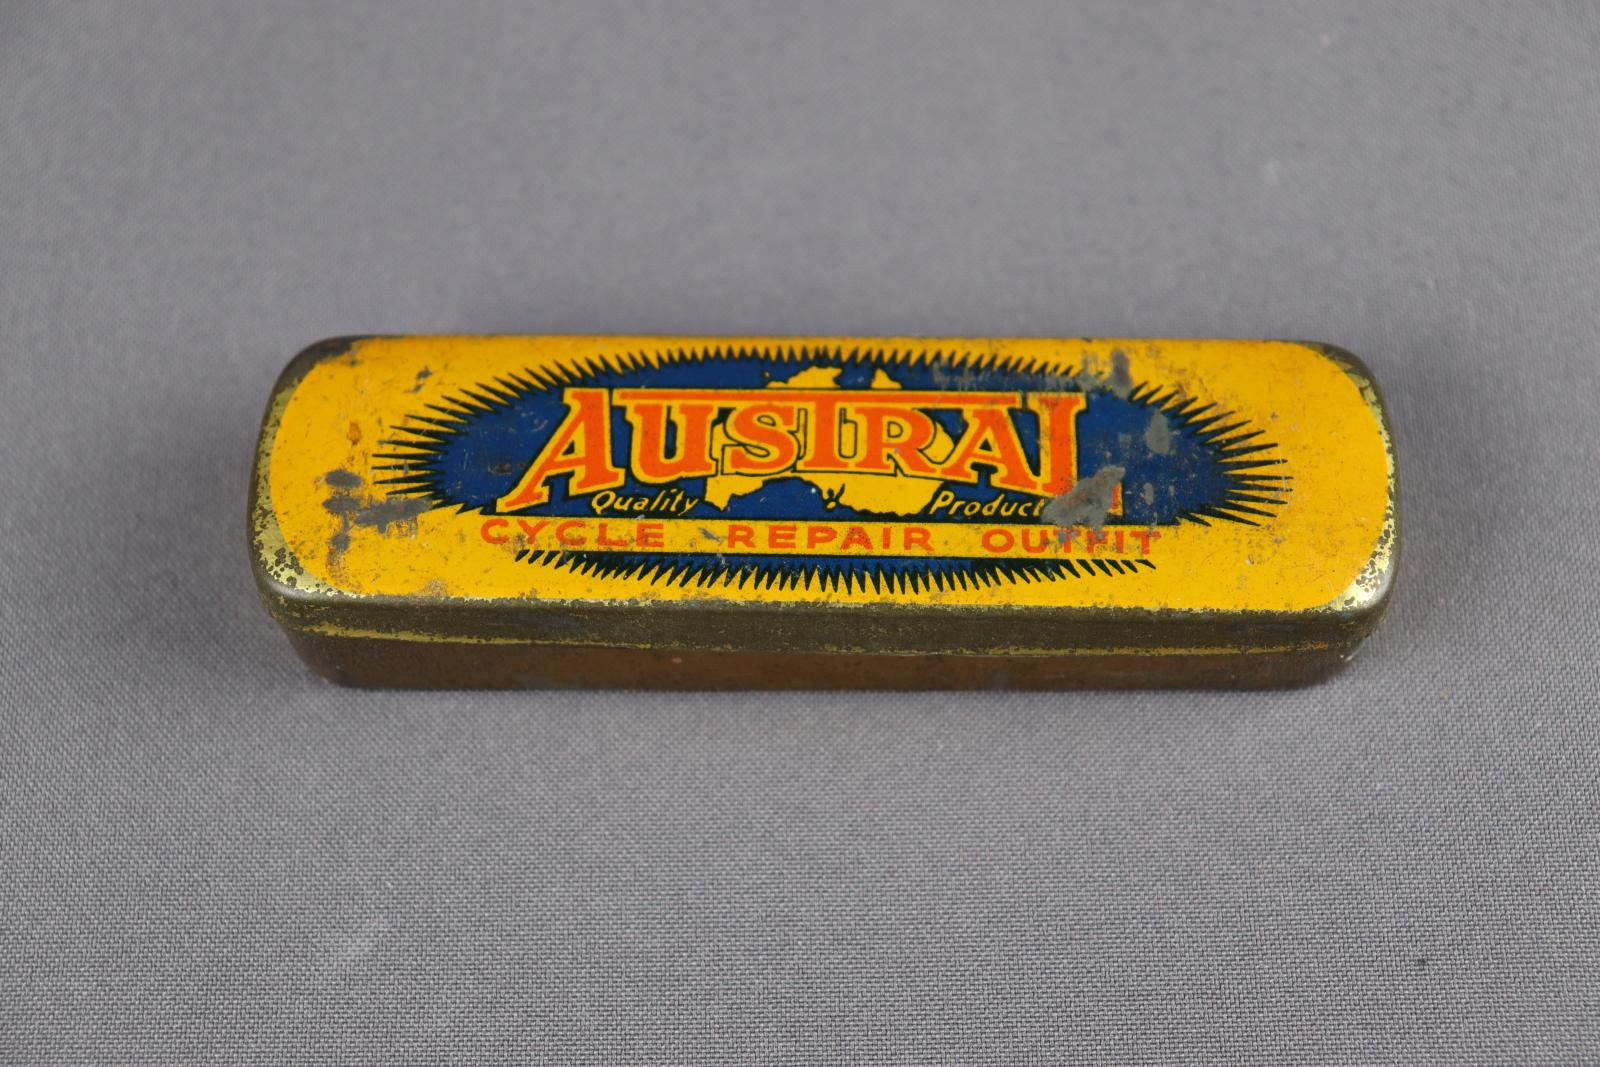 Rectangle metal tin. Lid of tin is yellow with orange text saying Austral Cycle Repair Outfit